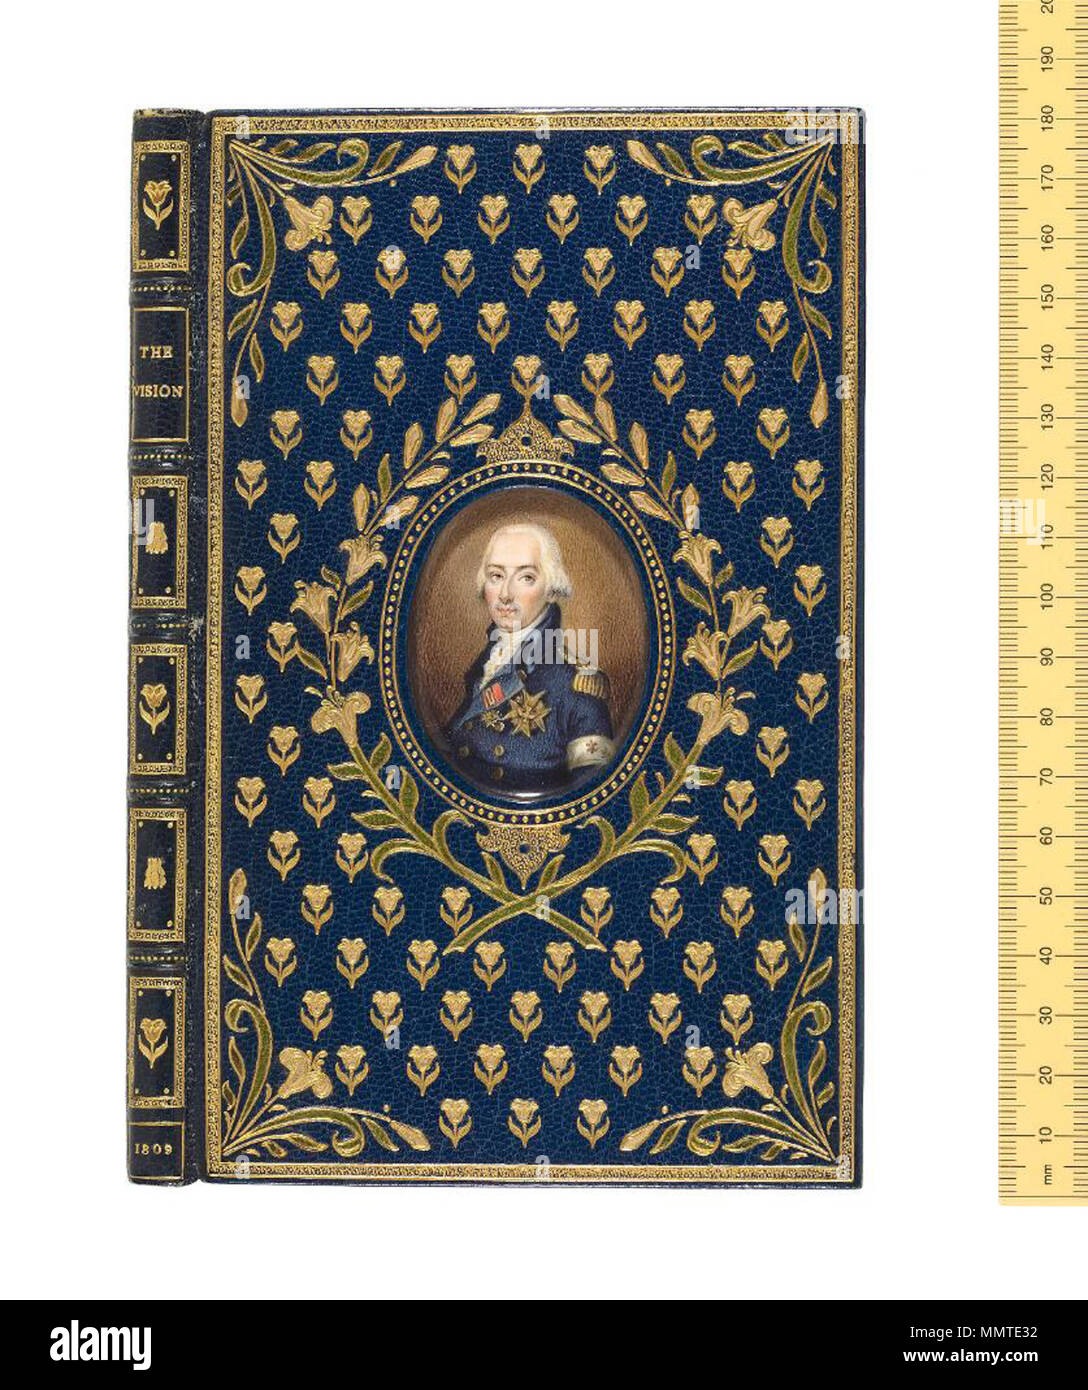 . Cosway-style binding. English (London), c.1930. Rivière & Son. Blue goatskin, the front cover decorated with gilt tulips and contrasting onlay flowers, lily cornerpieces, and wreath surrounding miniature painting of the Duc d'Enghien under glass; back cover with bees semée (scattered) around miniature of Napoleon. These bindings were devised by the London bookseller Henry Sotheran, inspired by the 18thcentury miniaturist Richard Cosway (1740–1821). They became hugely popular in the first half of the 20th century, with the miniaturepainter Miss C. B. Currie responsible for almost a thousand b Stock Photo